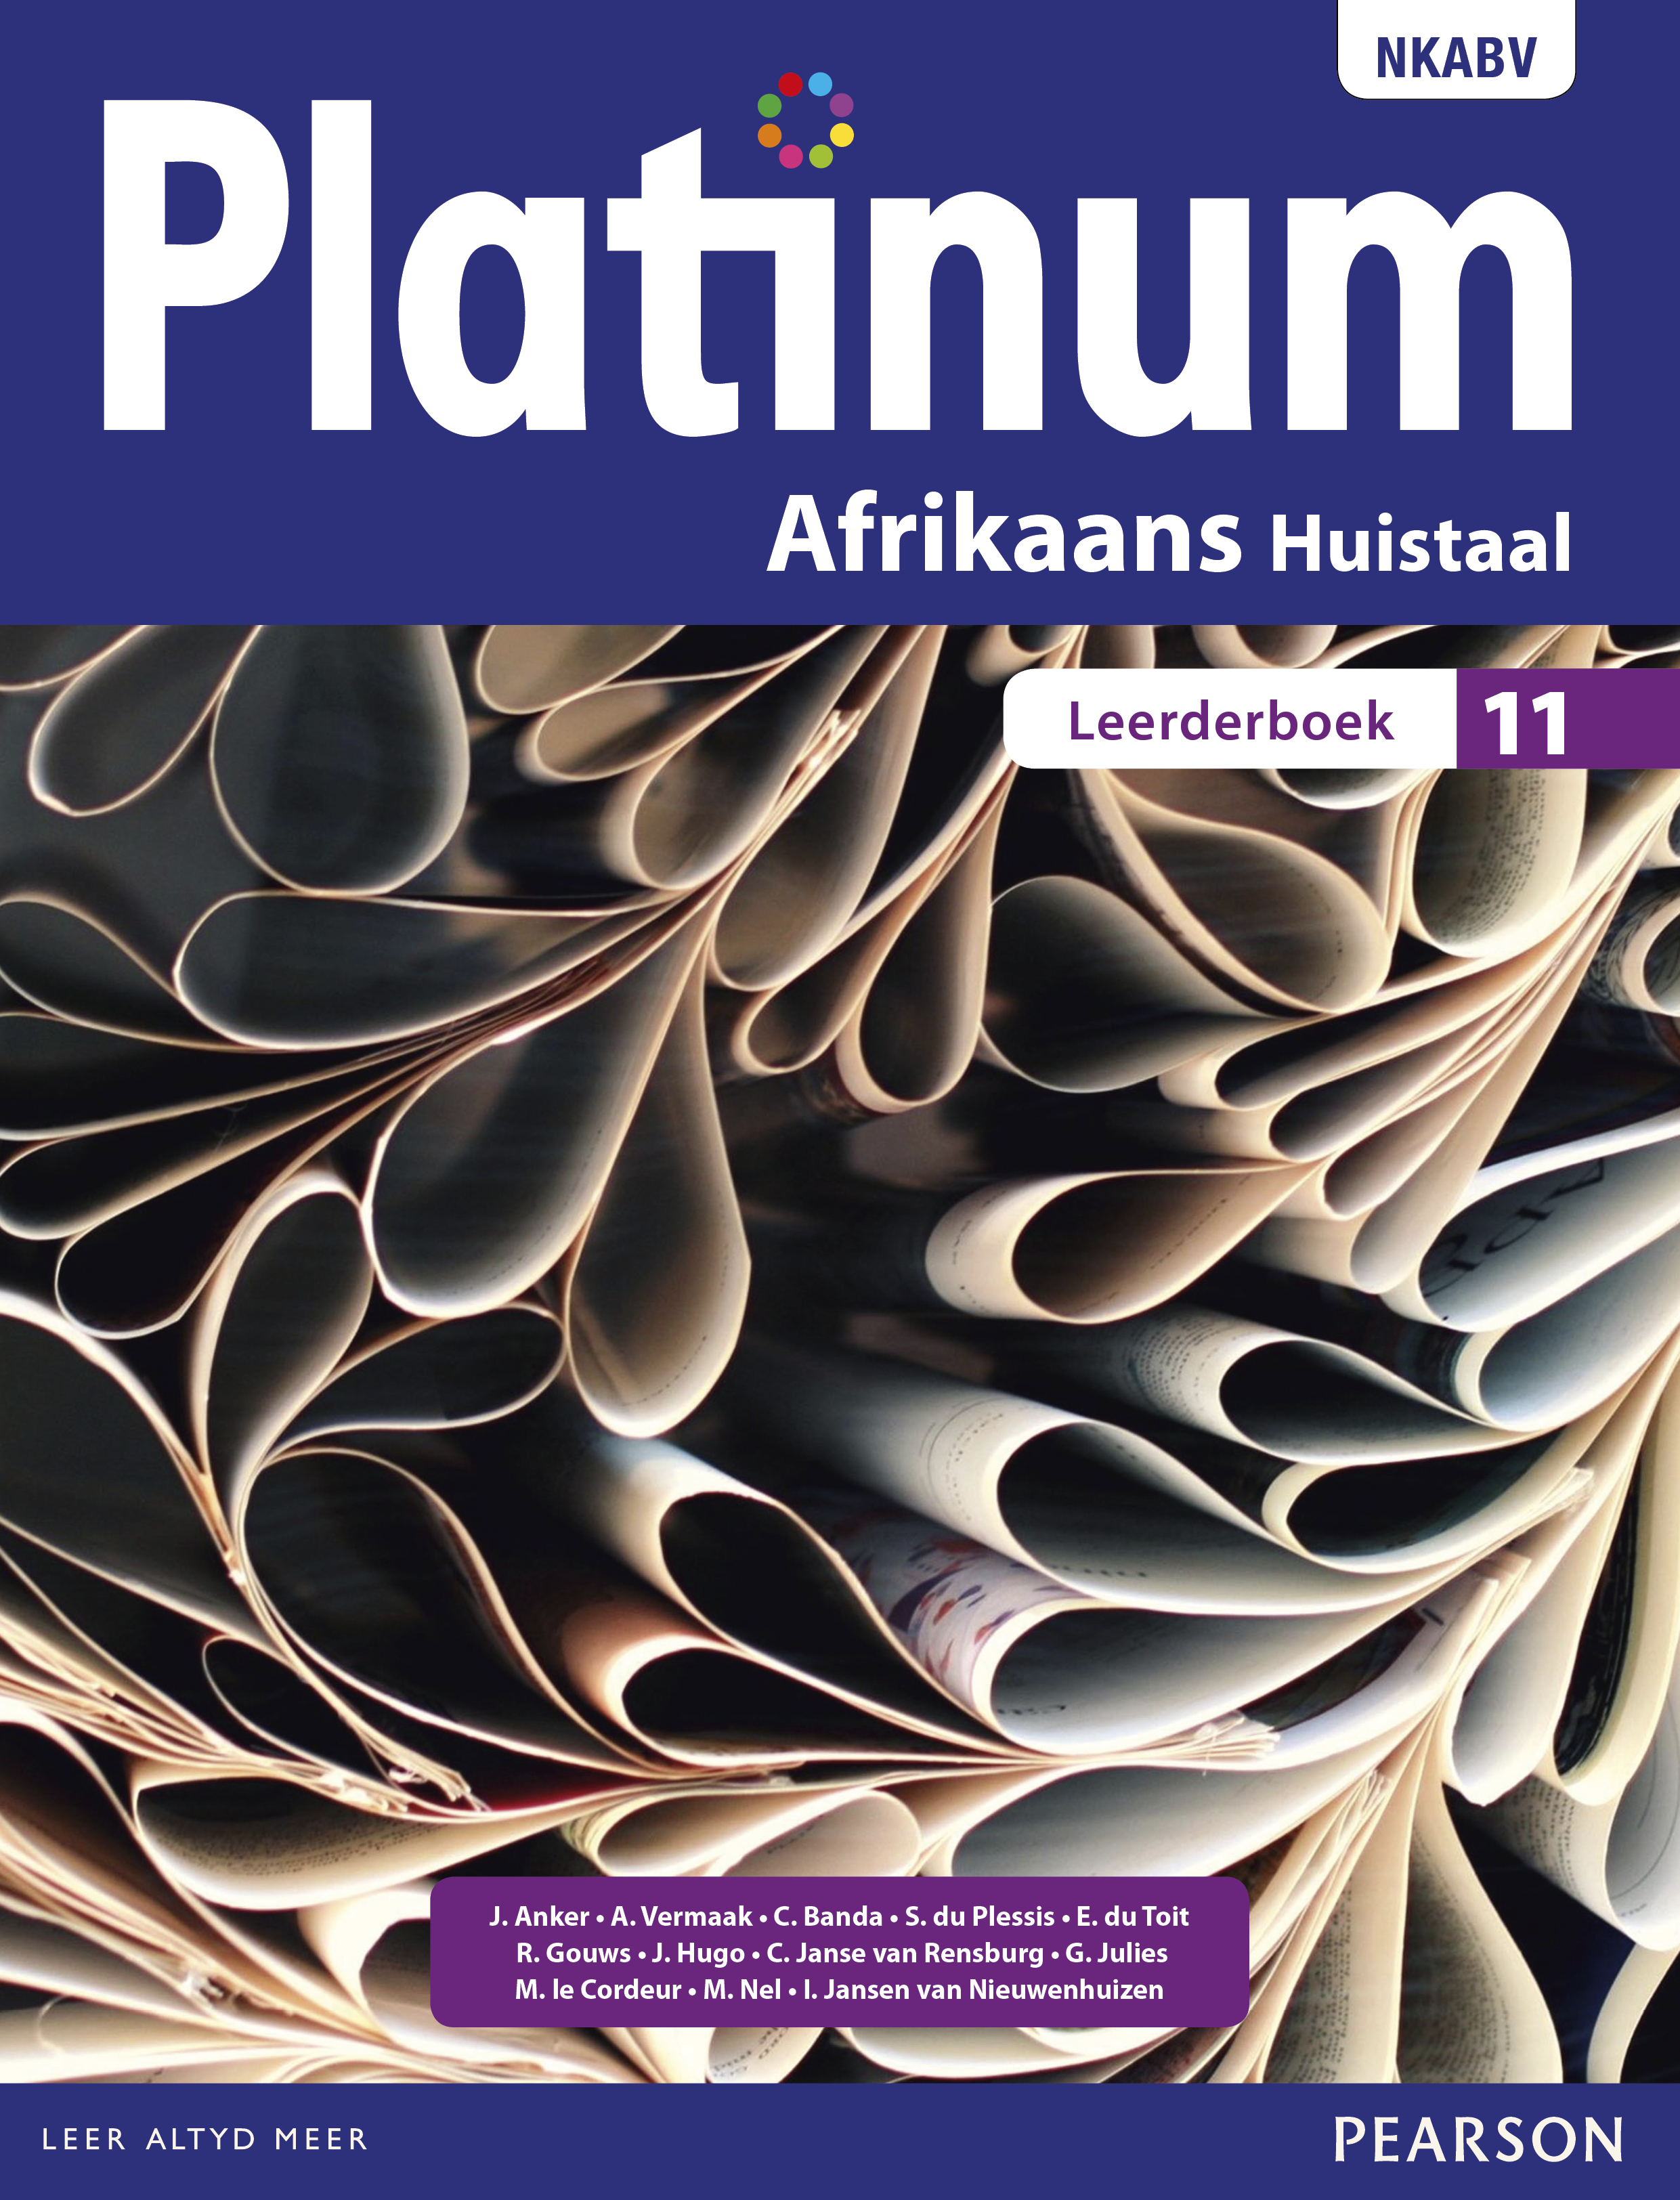 Picture of Platinum Afrikaans NKABV